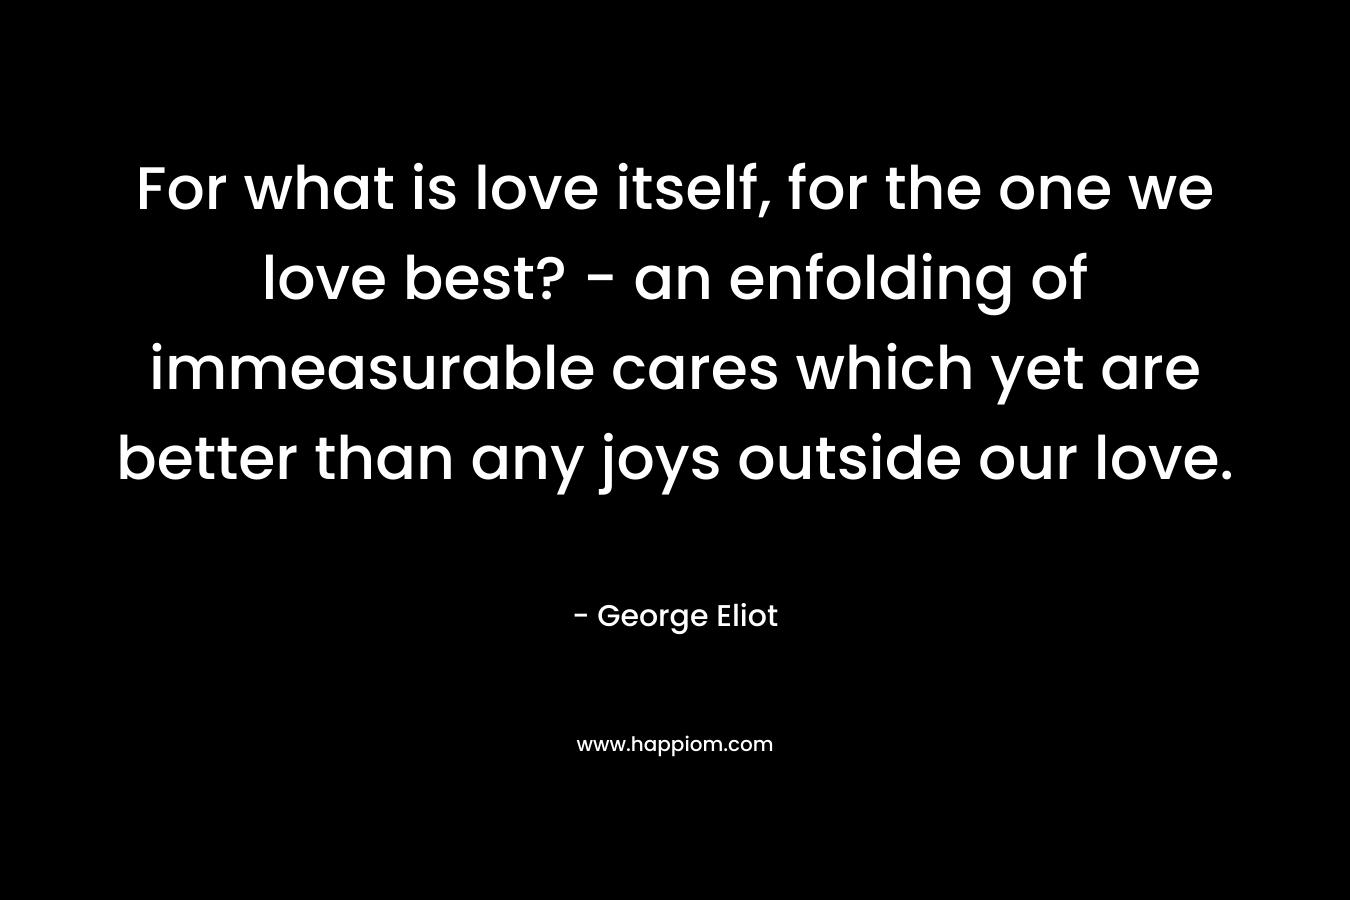 For what is love itself, for the one we love best? – an enfolding of immeasurable cares which yet are better than any joys outside our love. – George Eliot